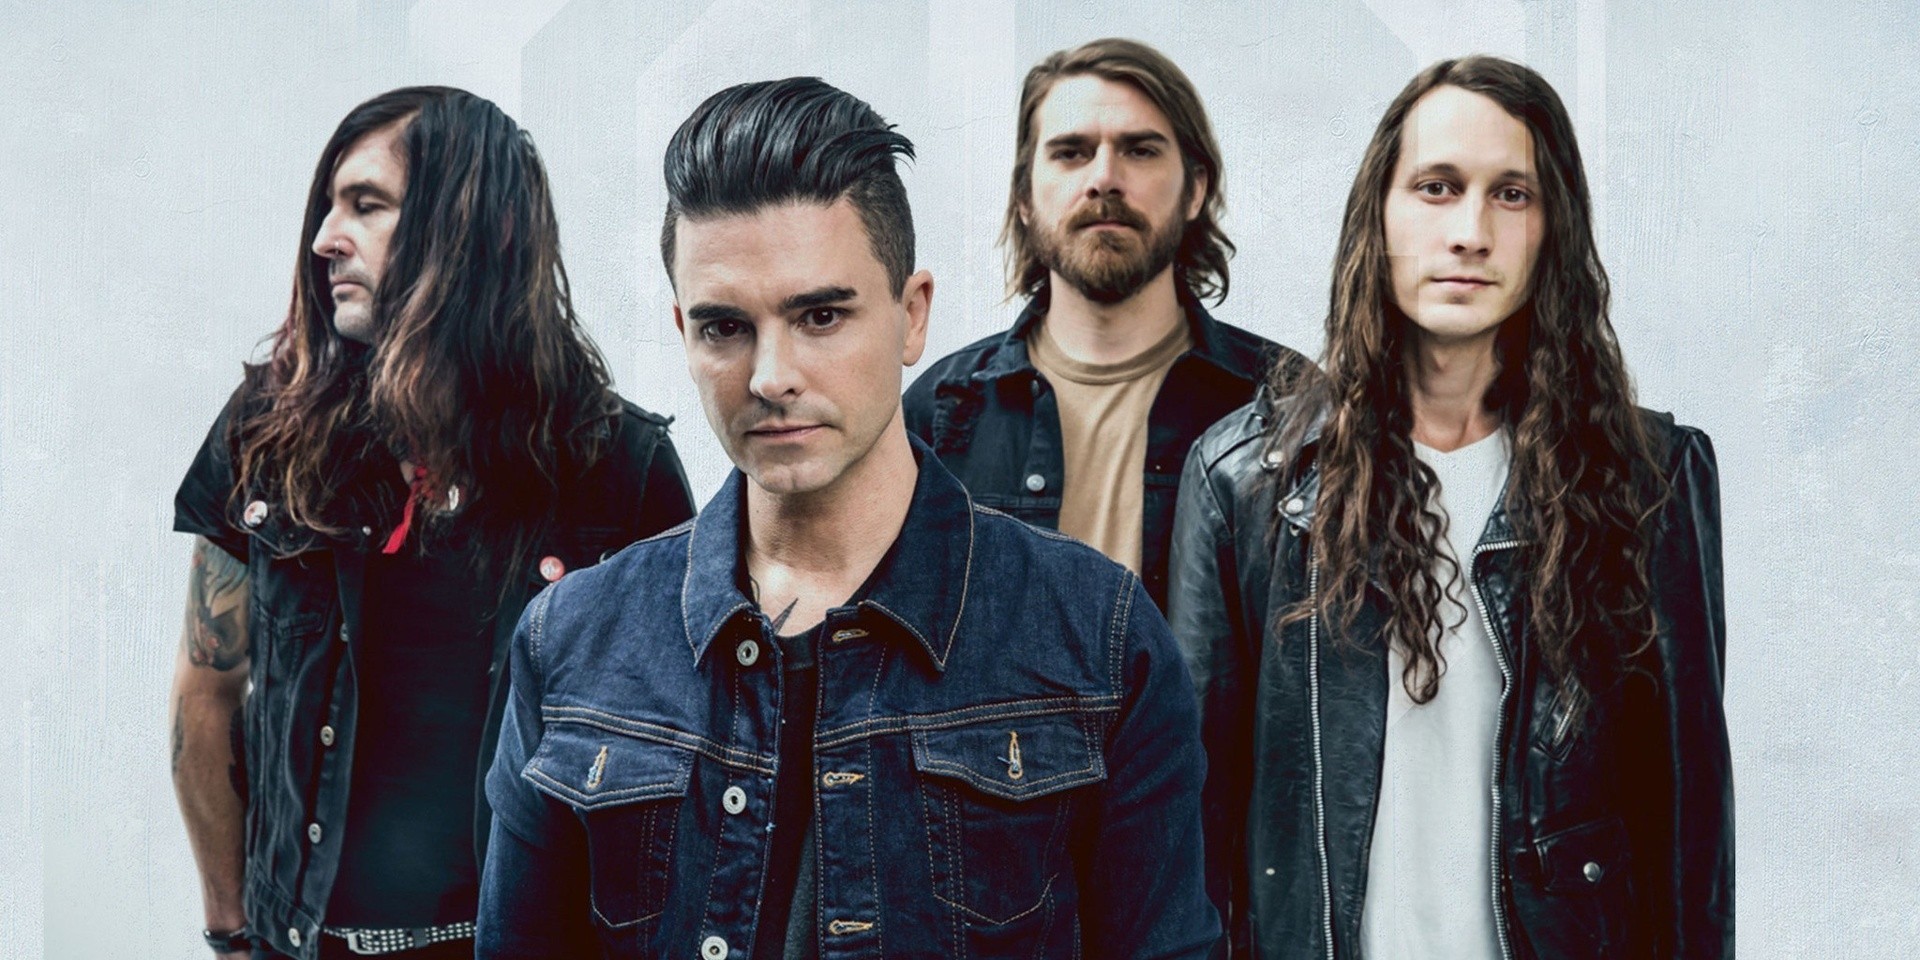 Dashboard Confessional releases Now Is Then Is Now, a series of reimagined versions of classic albums